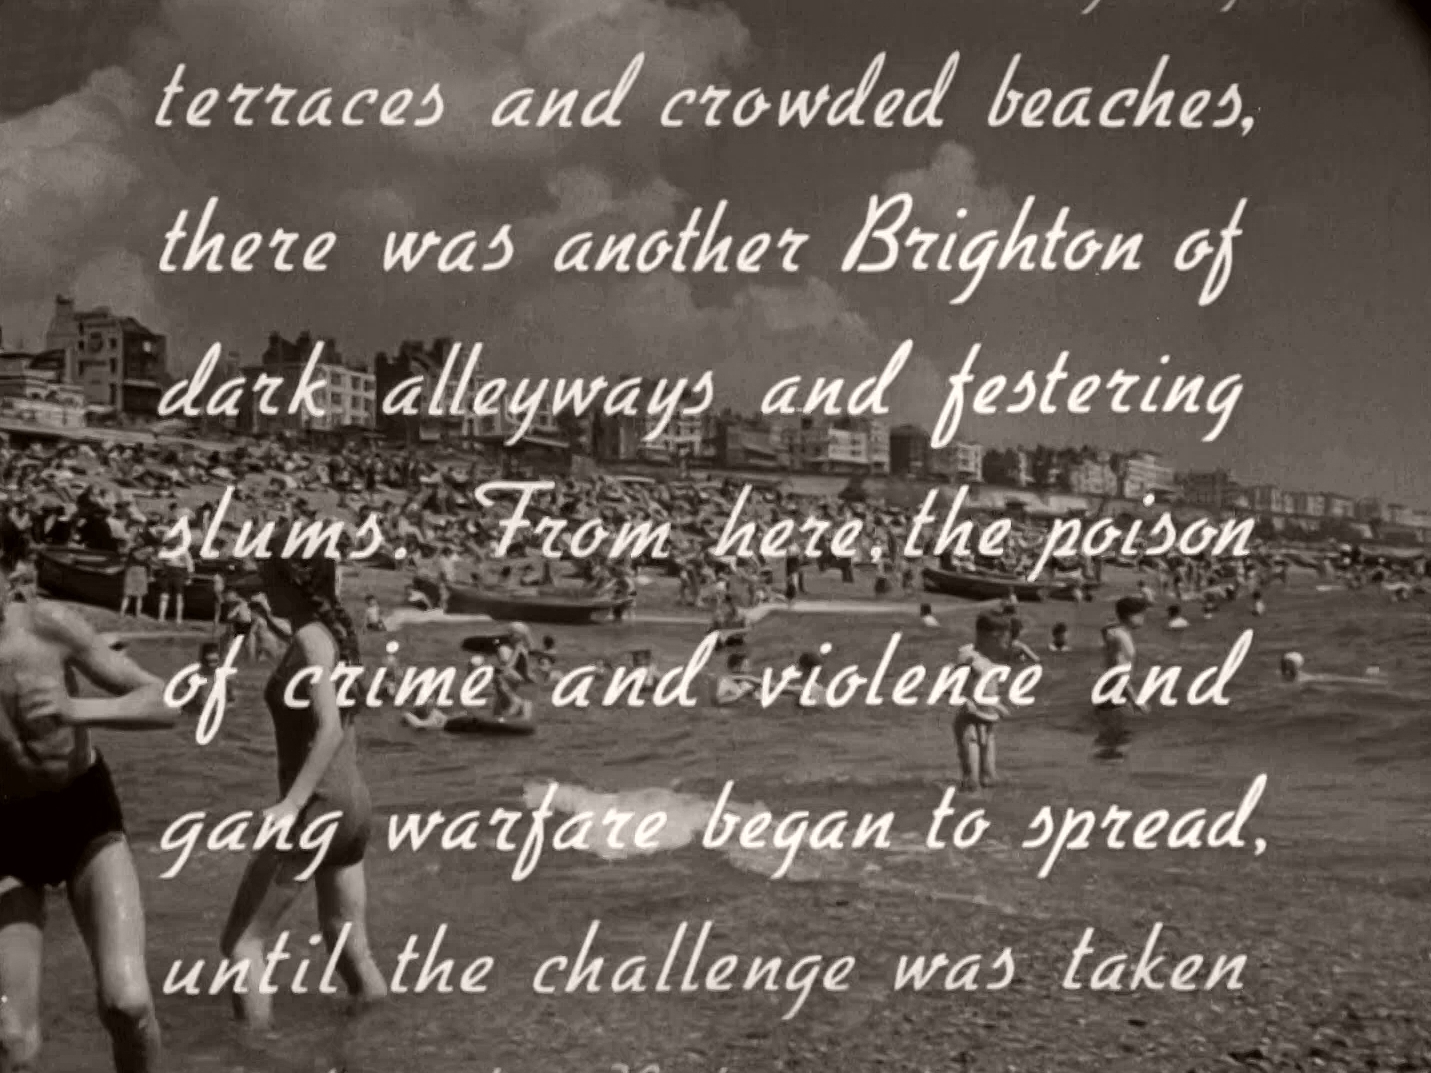 Main title from Brighton Rock (1948) (16). …terraces and crowded beaches there was another Brighton of dark alleyways and festering slums.  From here the poison of crime and violence and gang warfare began to spread, until the challenge was taken…